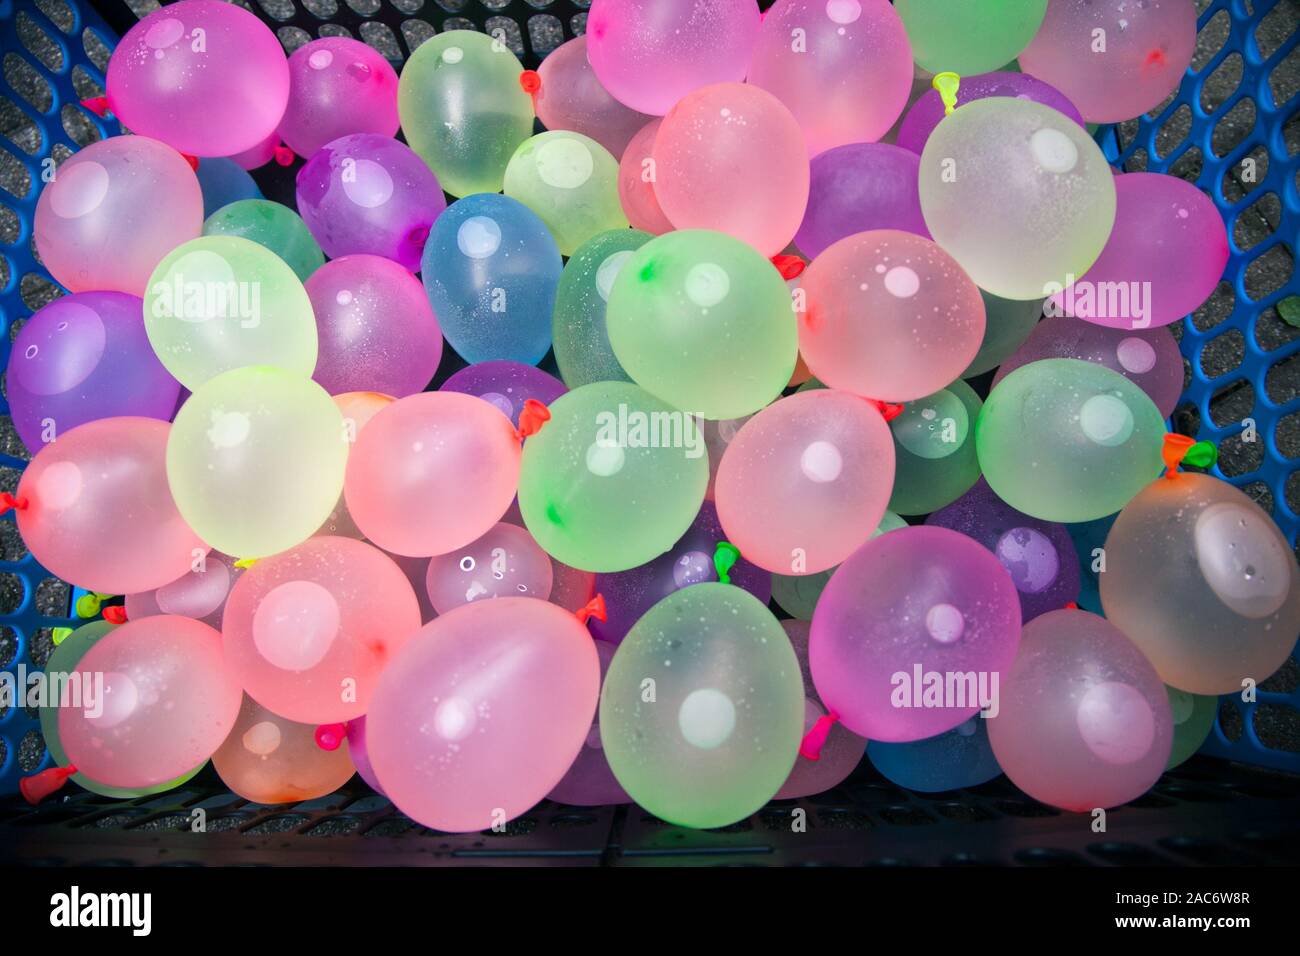 Colored inflatable rubber balls for throwing each other Game for children's fun. Stock Photo